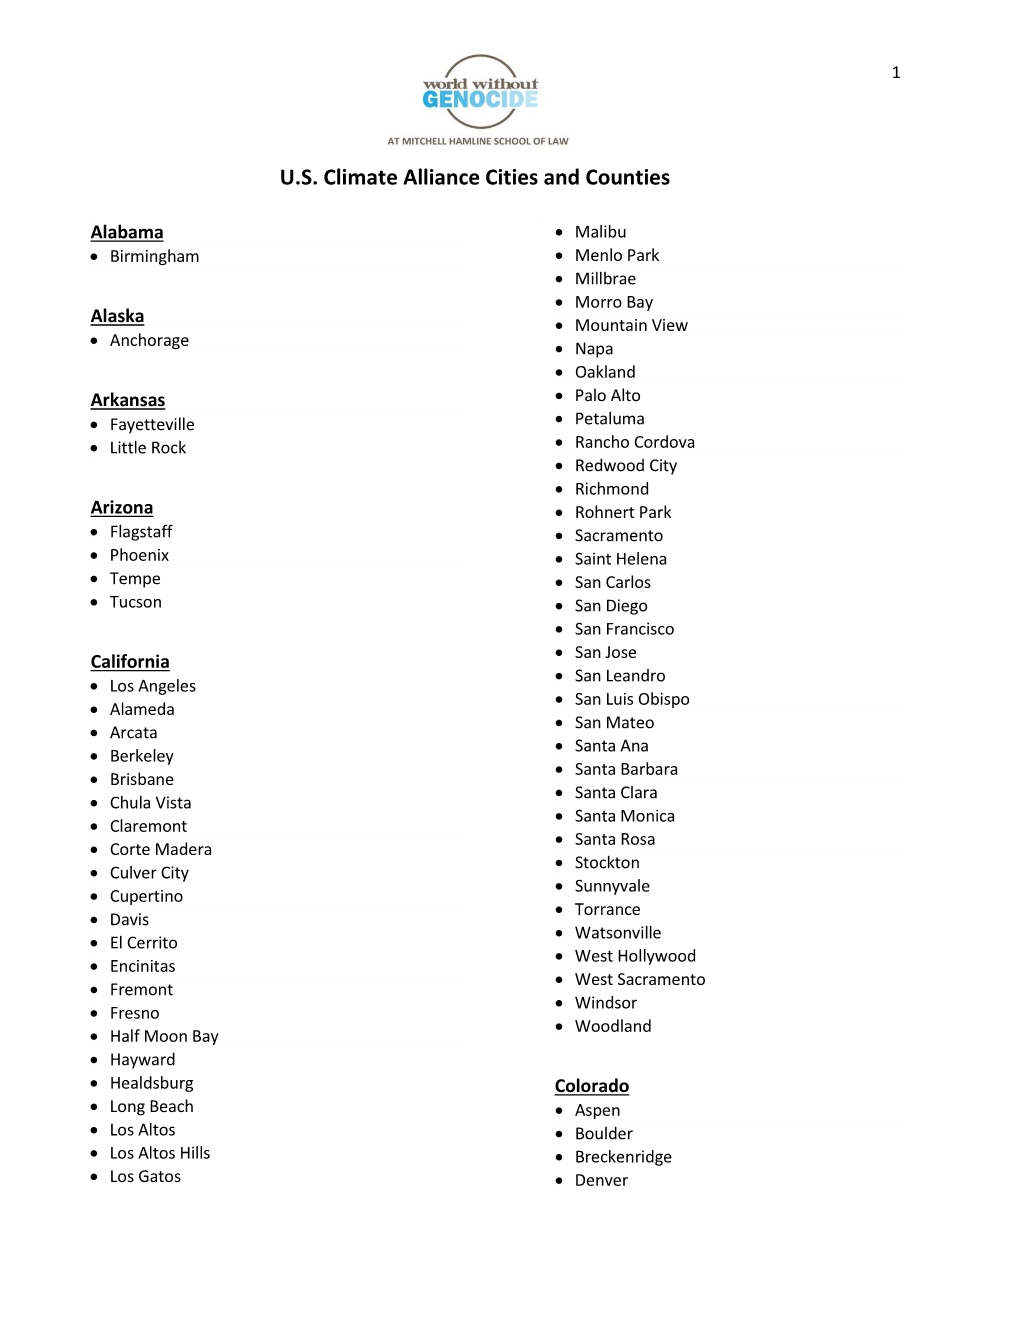 U.S. Climate Alliance Cities and Counties